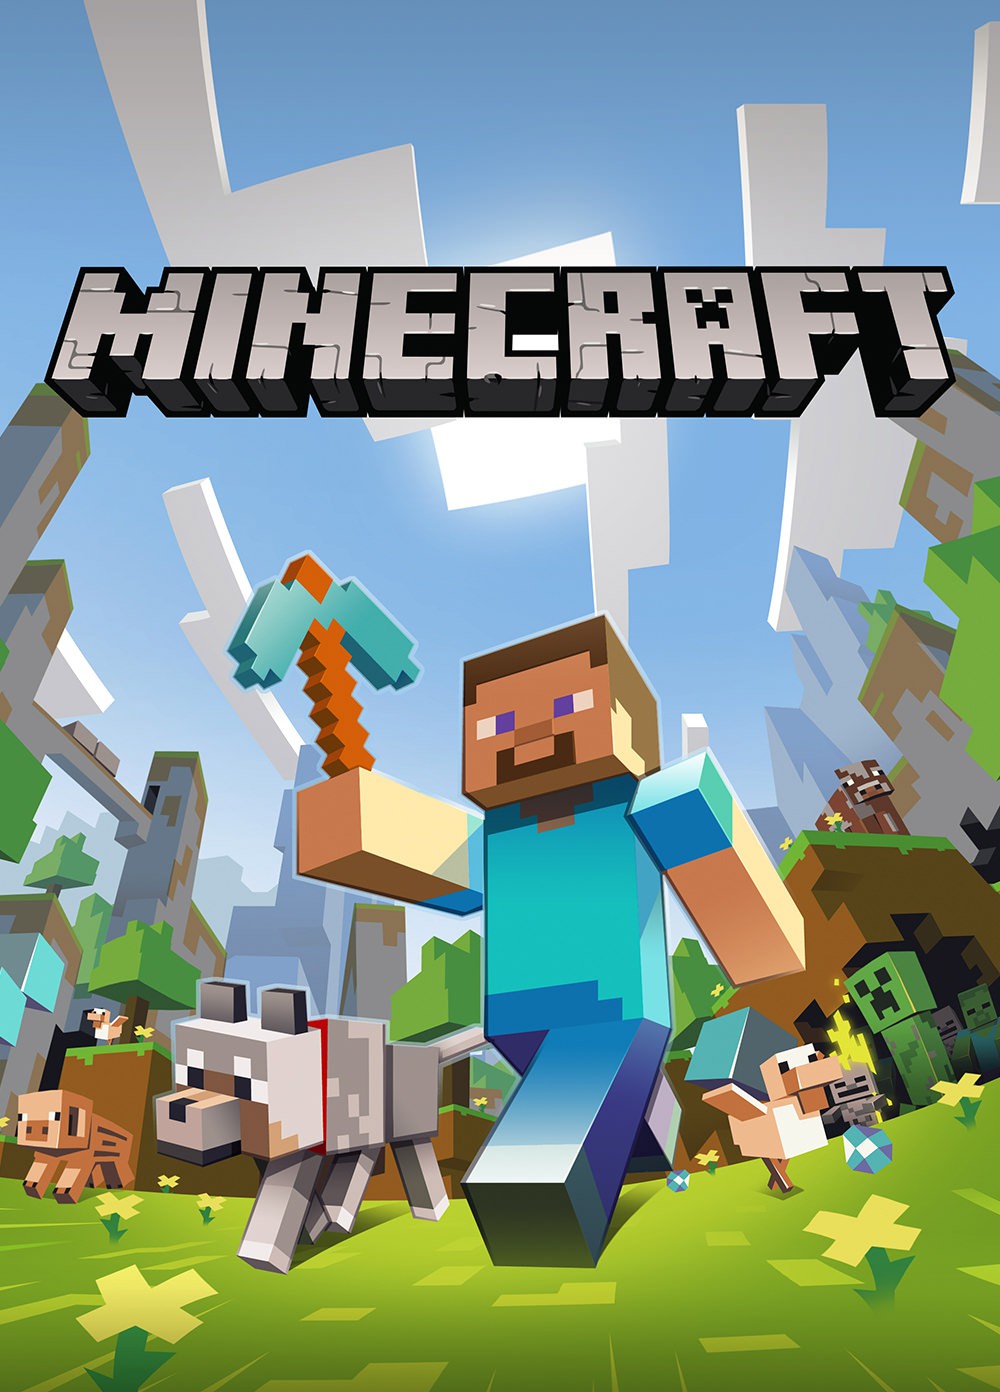 get minecraft on mac for free